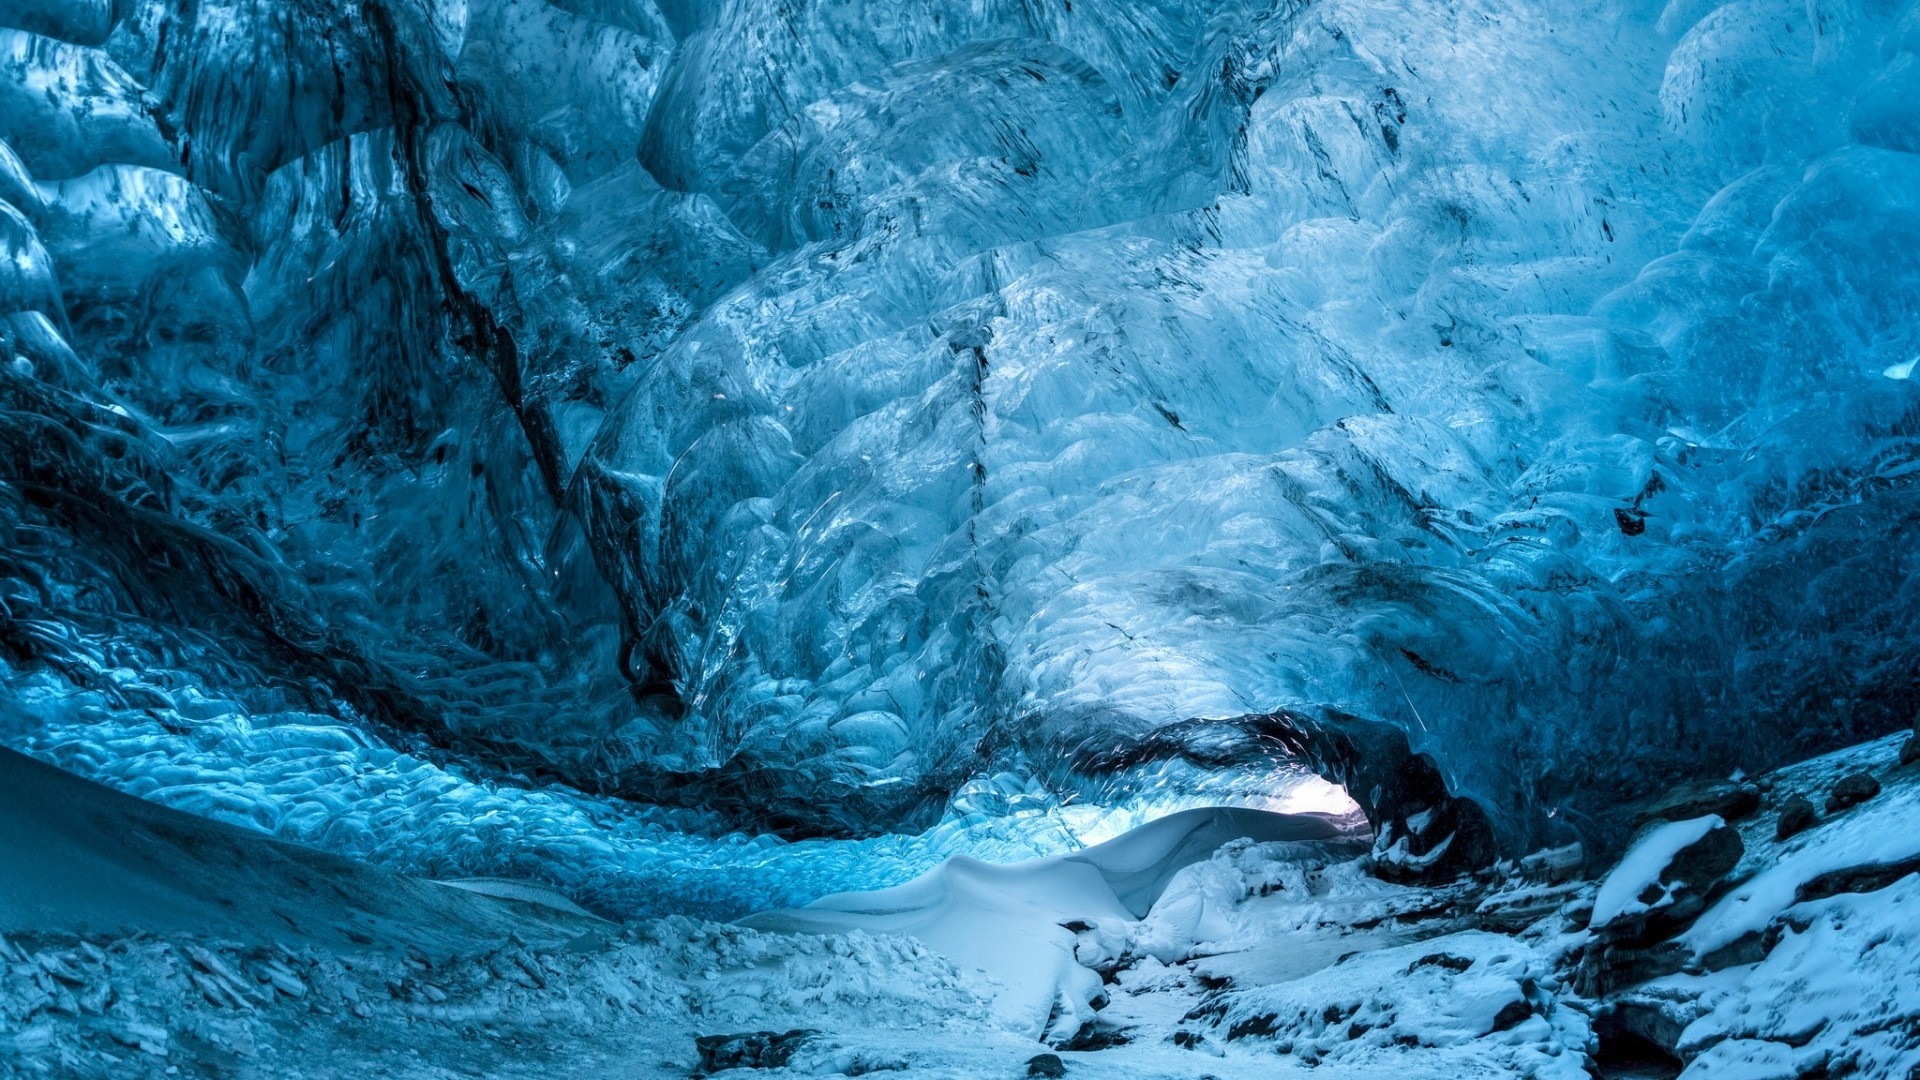 Lovely Ice Cave Hd Wallpaper Wallpaperfx